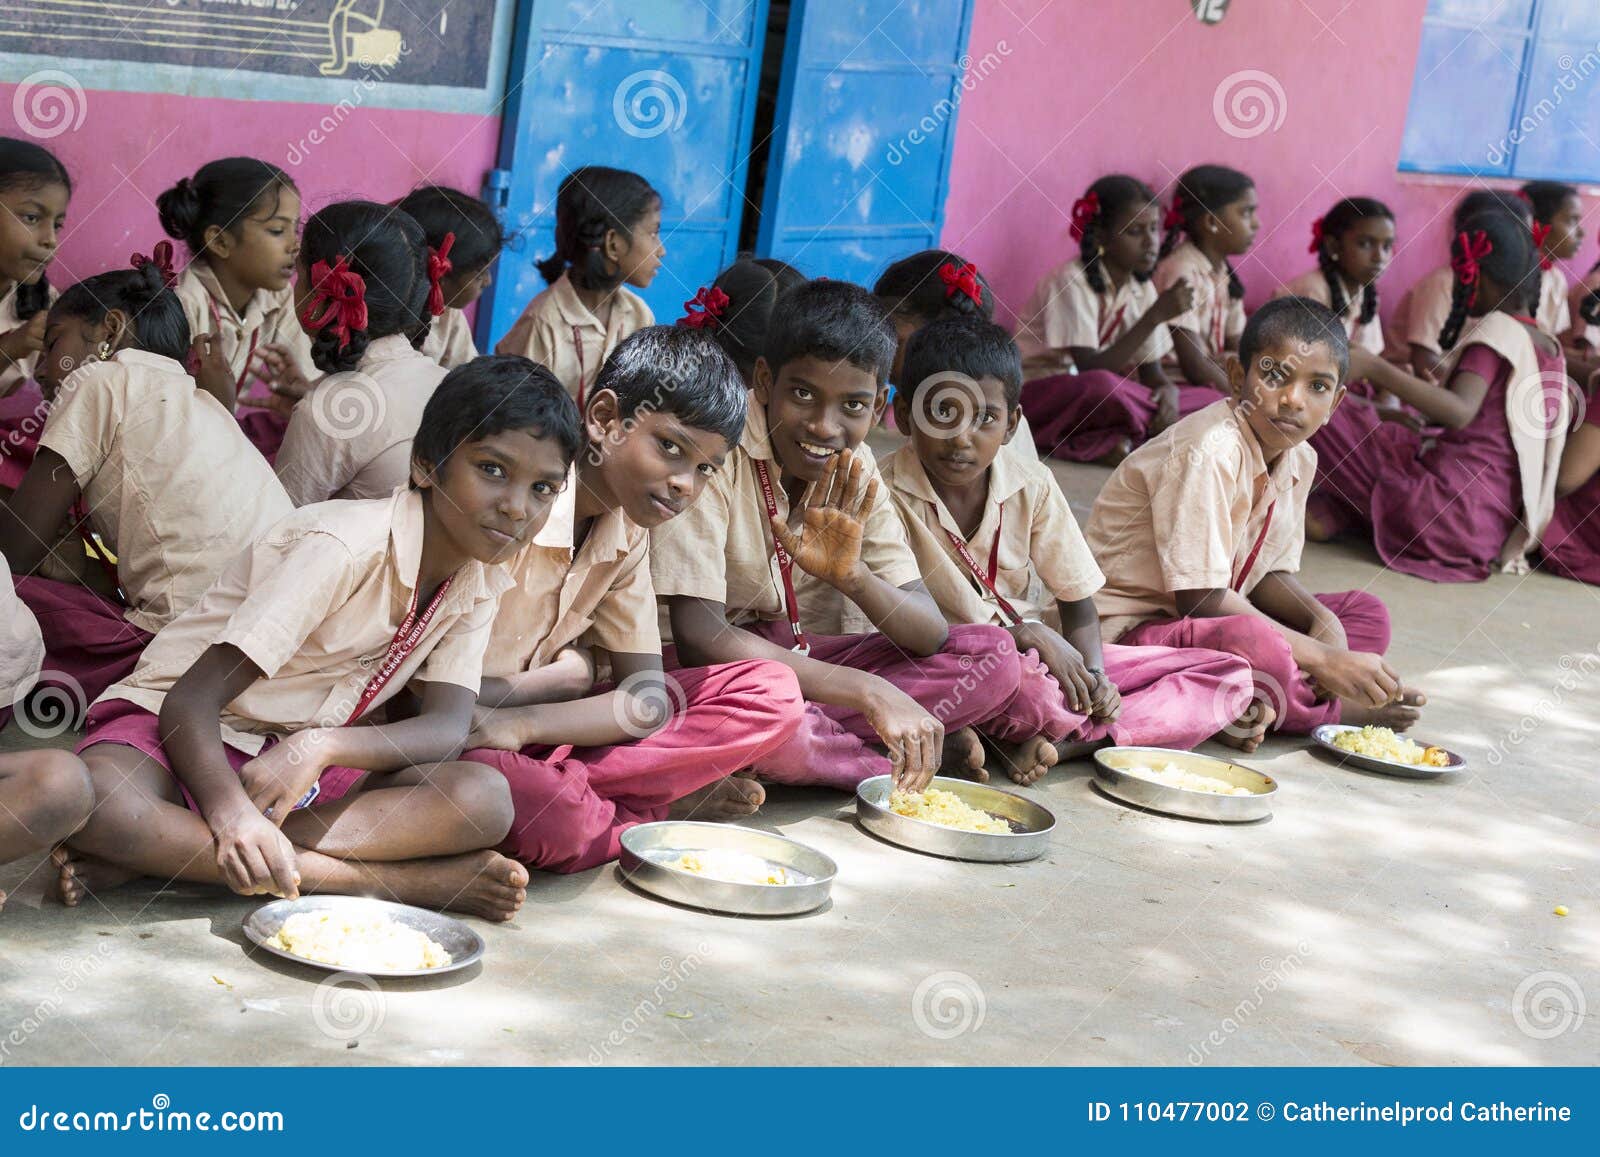 https://thumbs.dreamstime.com/z/documentary-editorial-image-unidentified-children-have-their-lunch-canteen-pondichery-puduchery-india-september-110477002.jpg